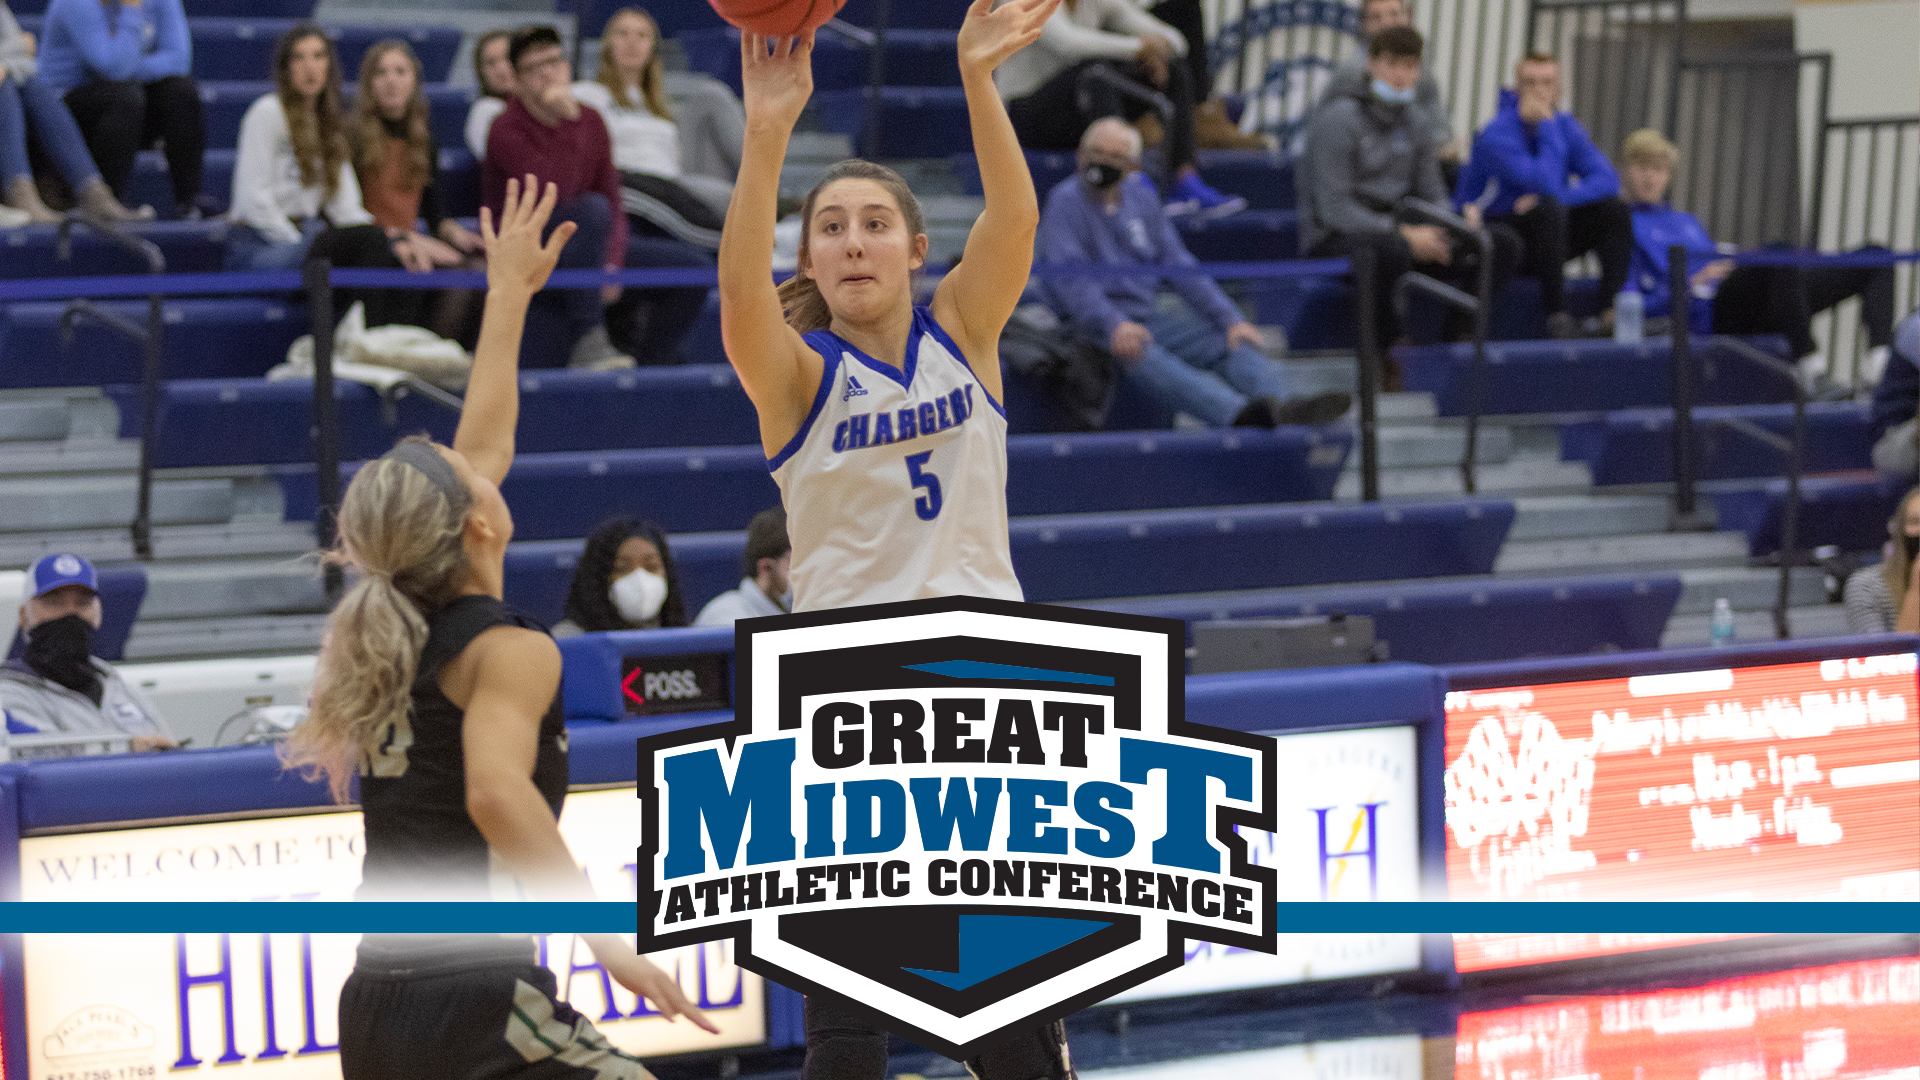 Charger sophomore Sydney Mills earns second-team All-G-MAC honors